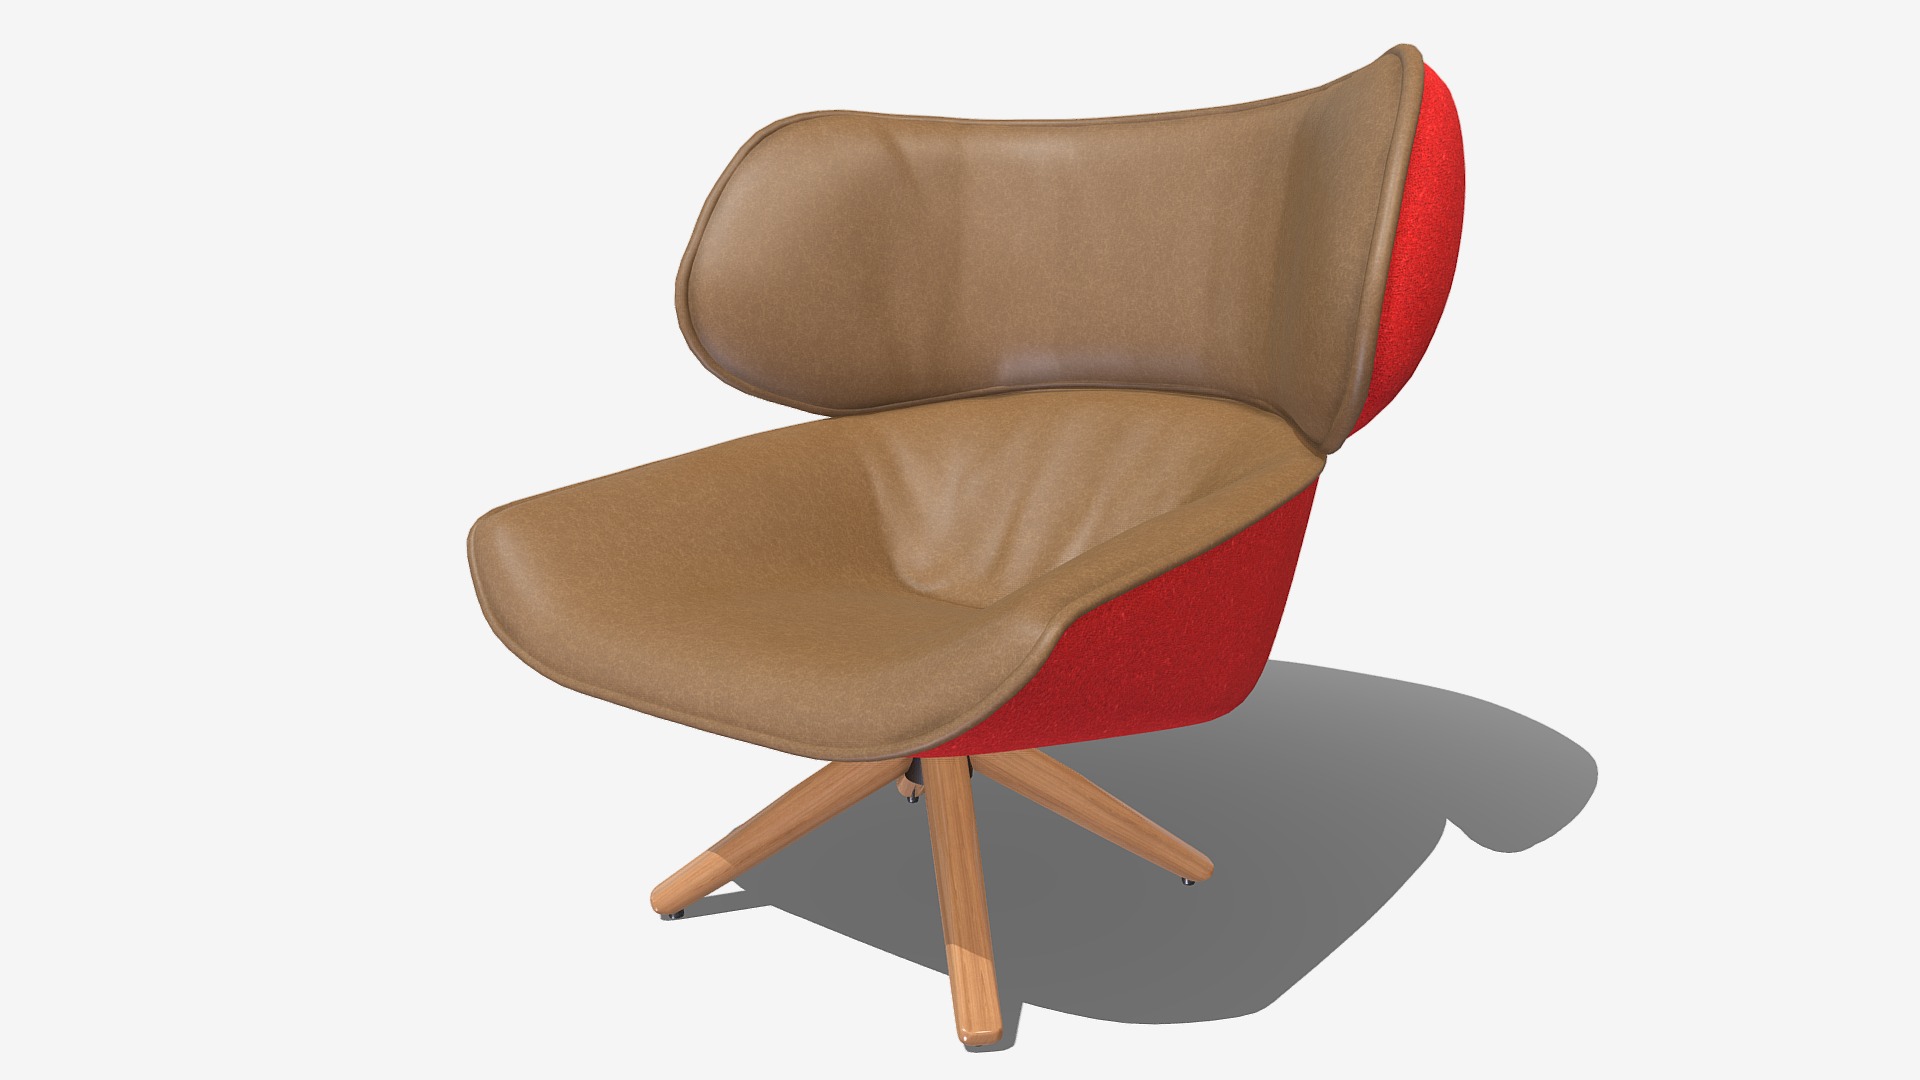 3D model TABANO B&B - This is a 3D model of the TABANO B&B. The 3D model is about a brown chair with a red cushion.